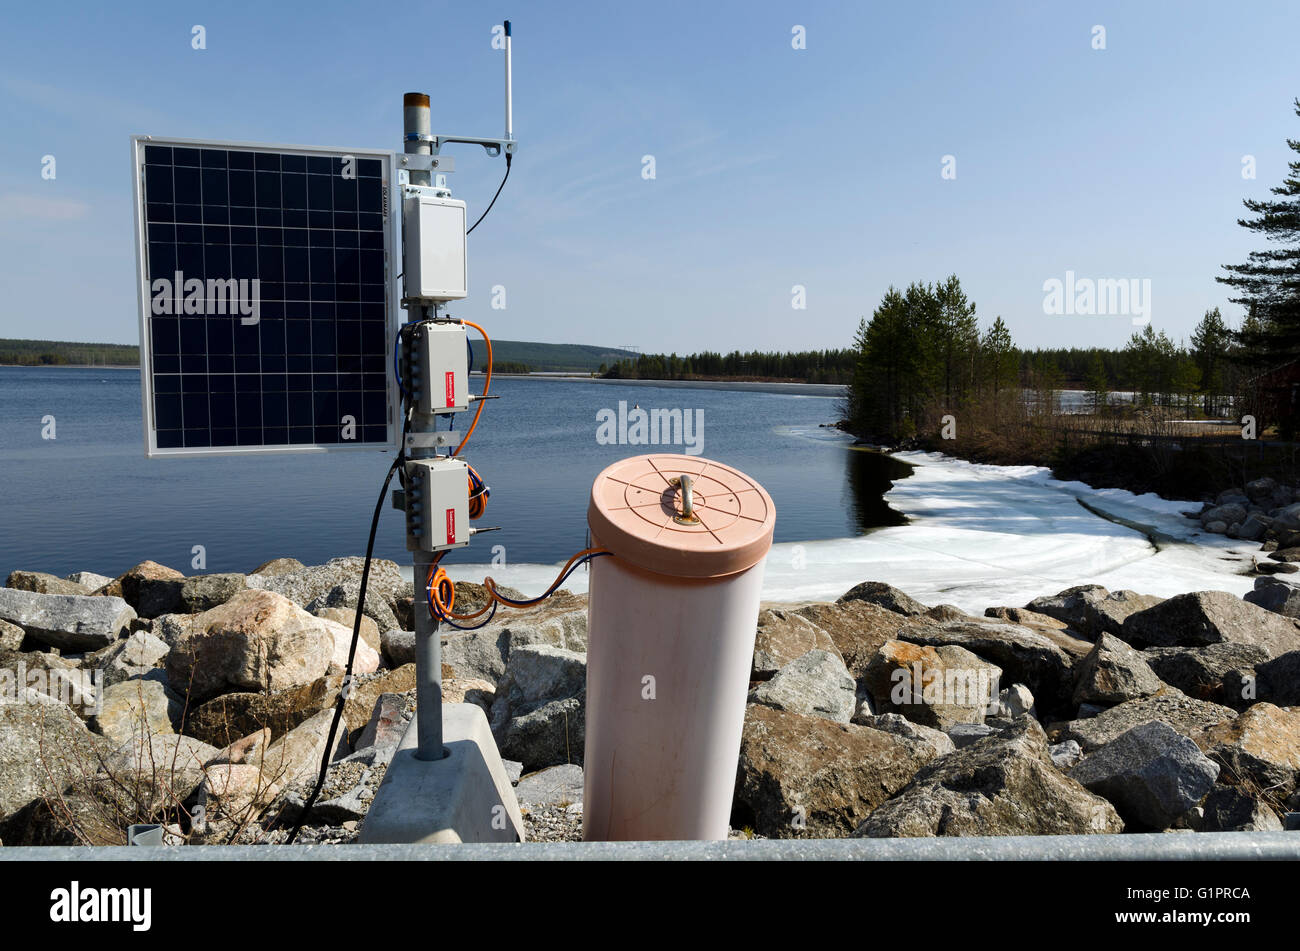 Remote surveillance of movements in a power plant embanking with power from the sun, picture from the North of Sweden. Stock Photo